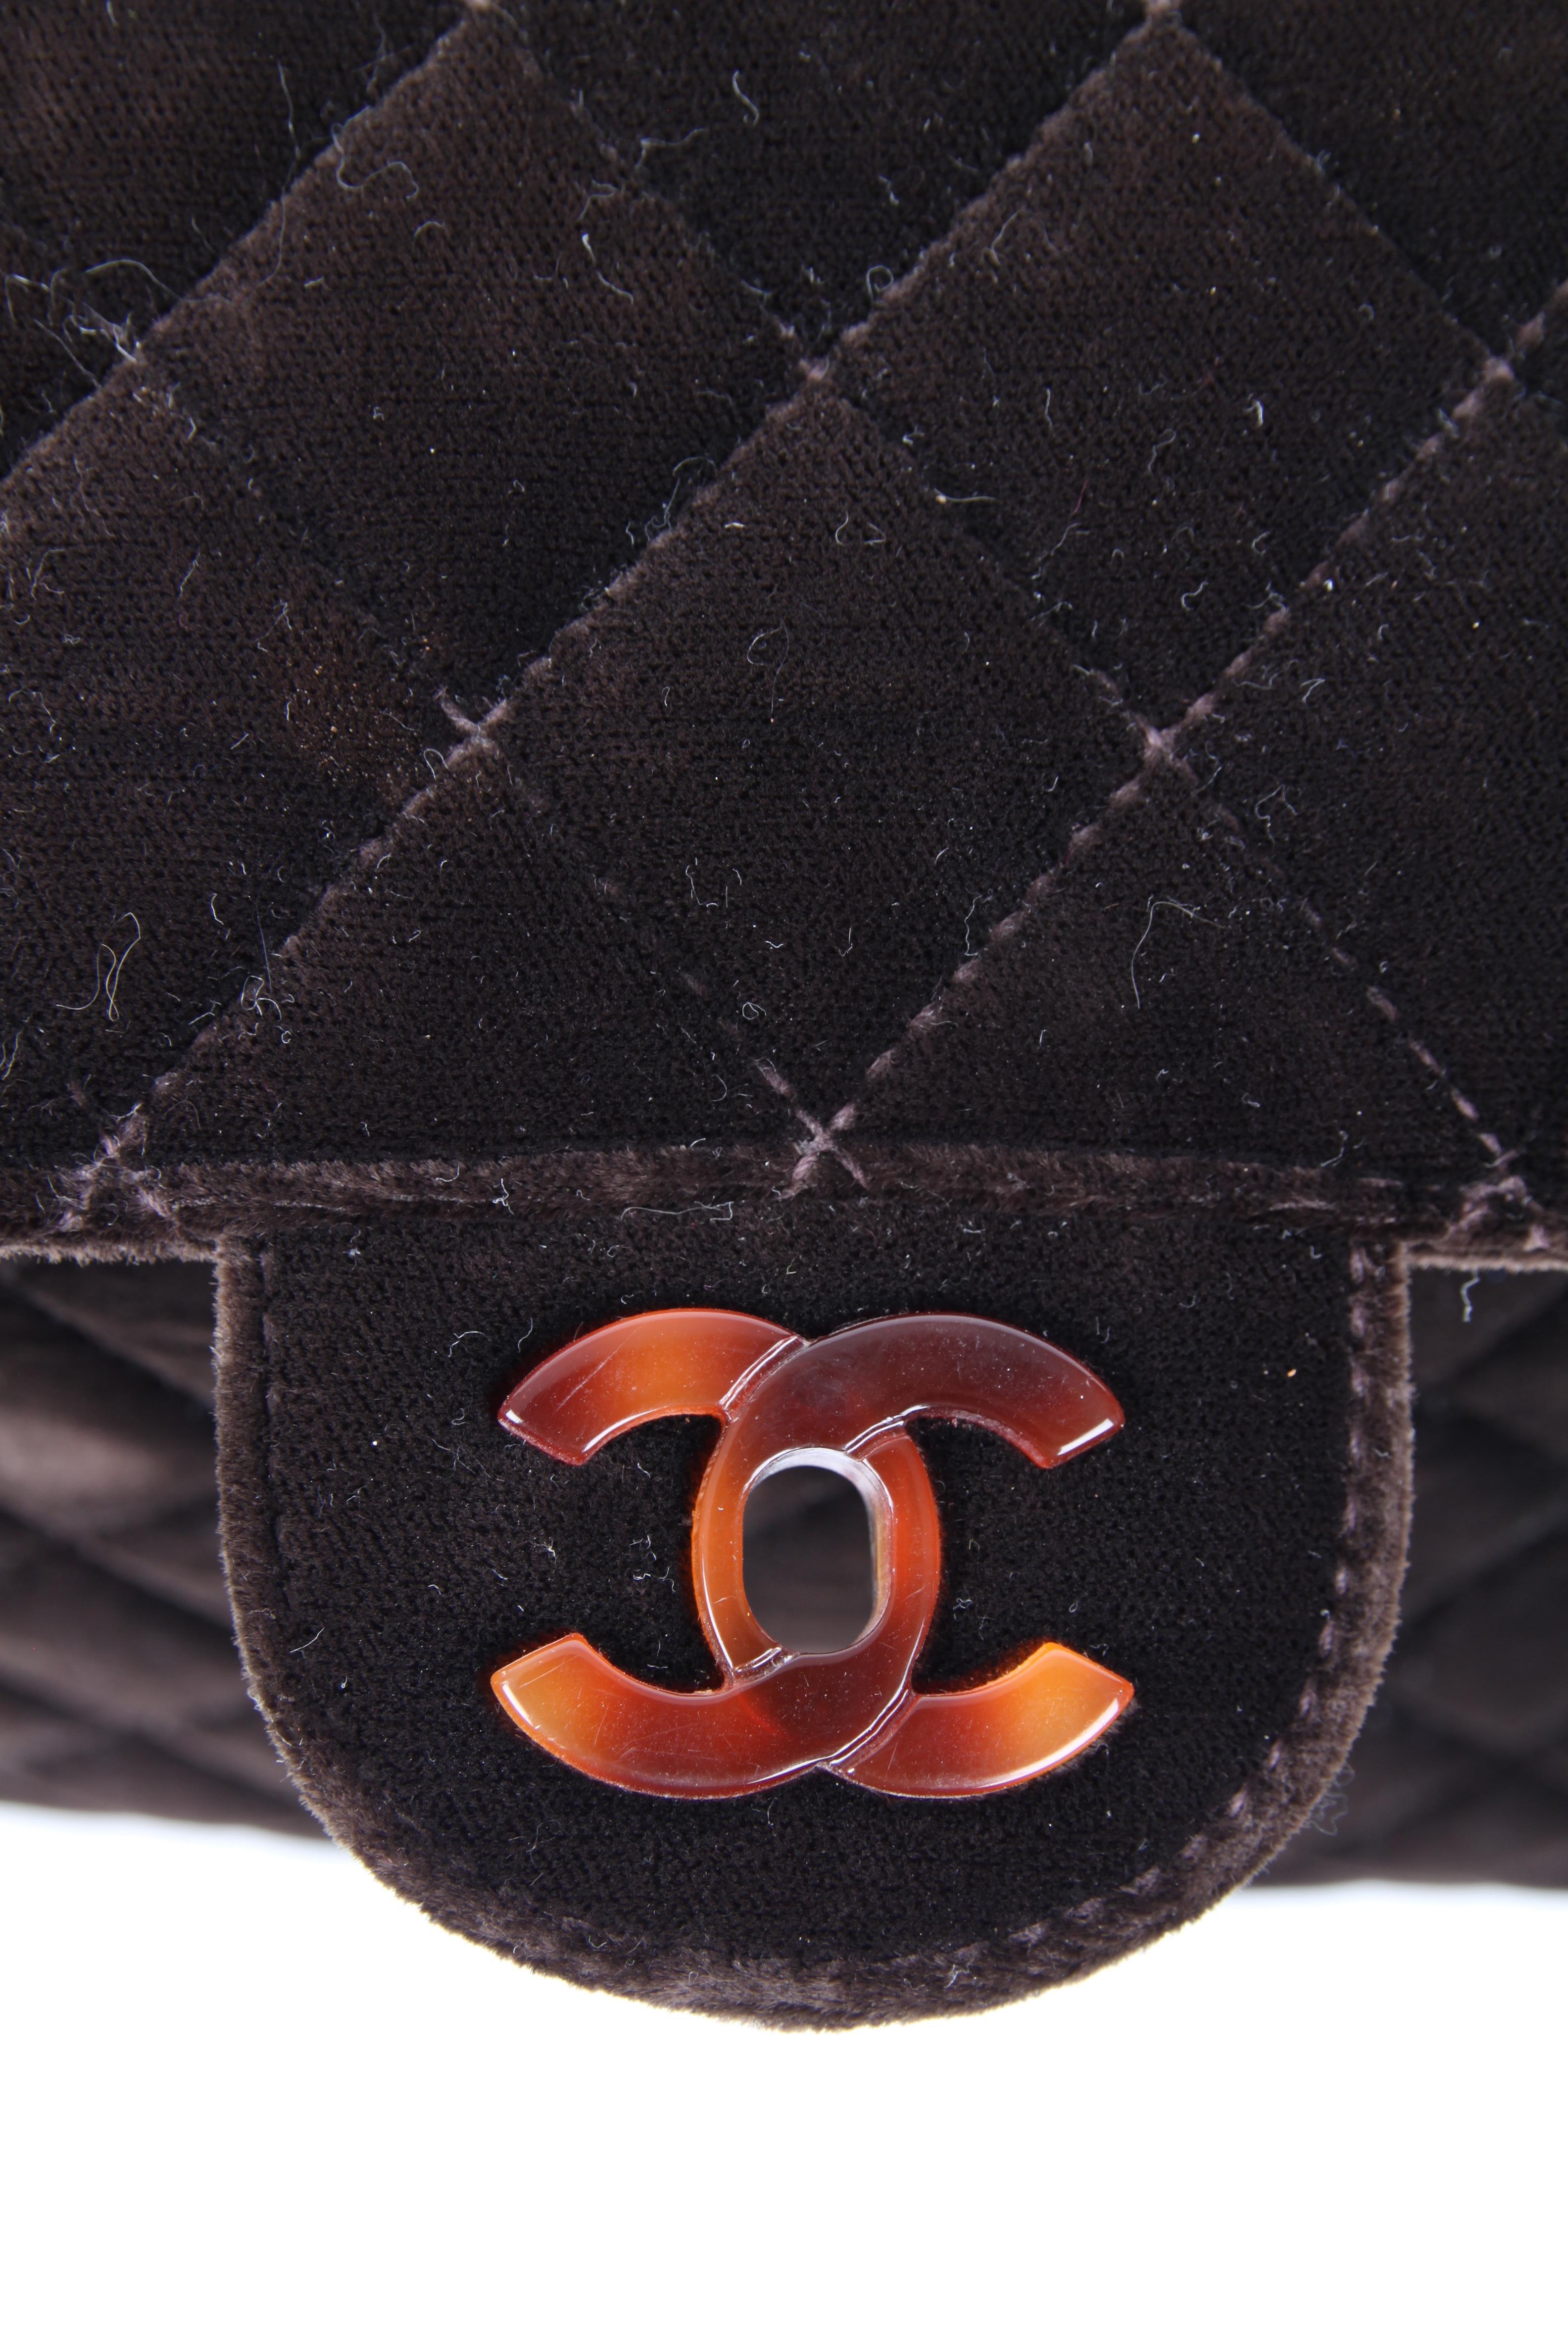 Chanel Brown Suede Quilted Tortoiseshell Hardware Flap Bag For Sale 2